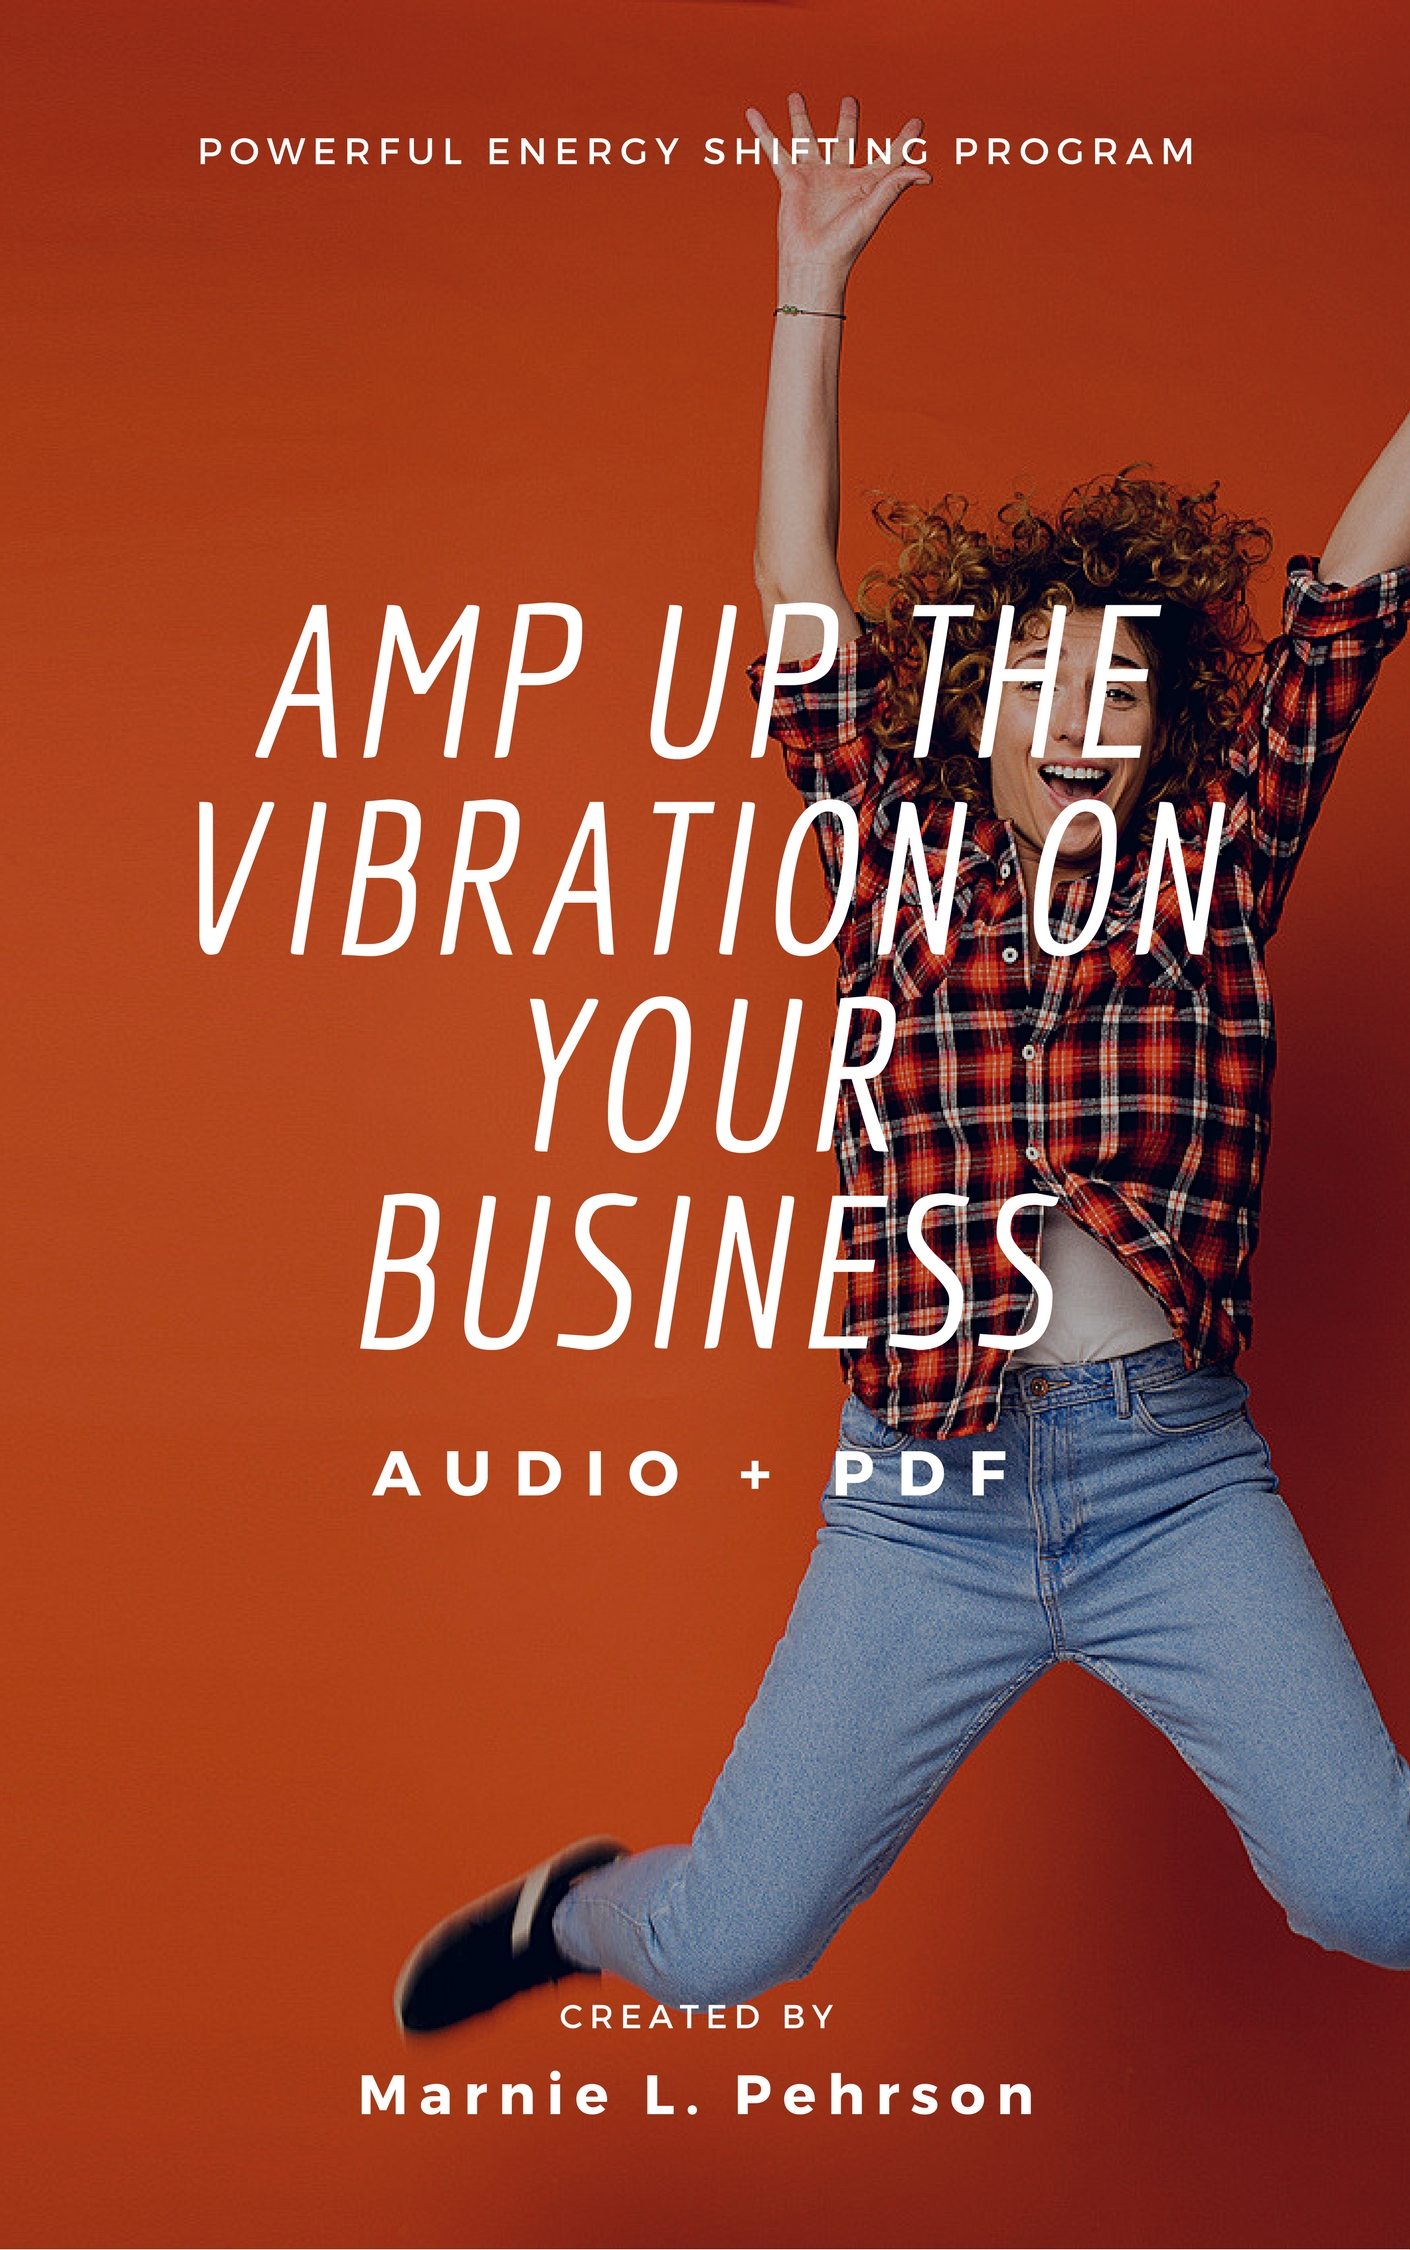 amp up the vibration on your business - Start Over Here